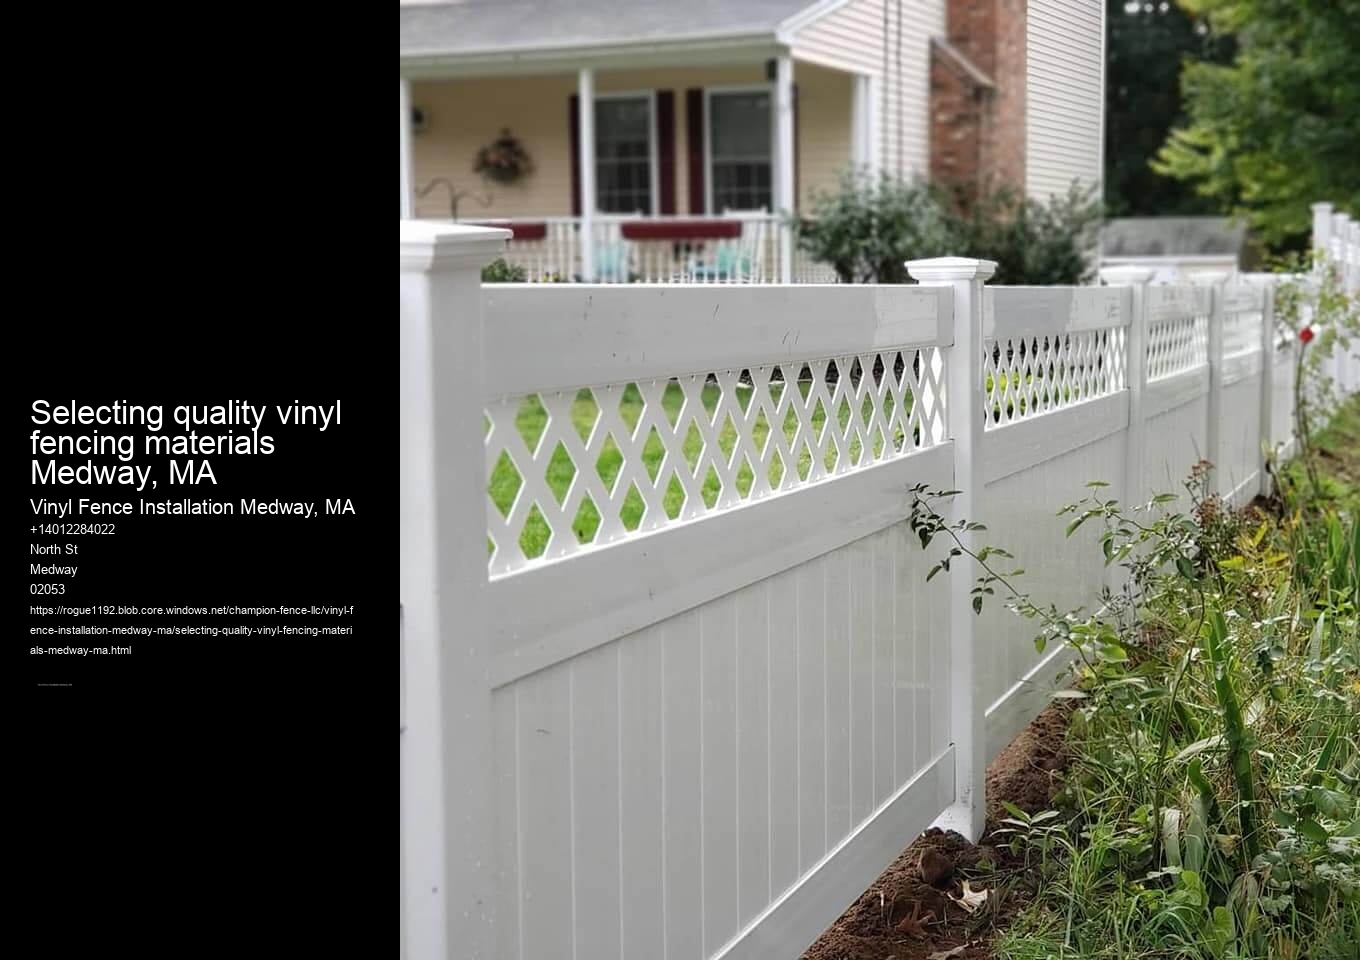 Selecting quality vinyl fencing materials Medway, MA